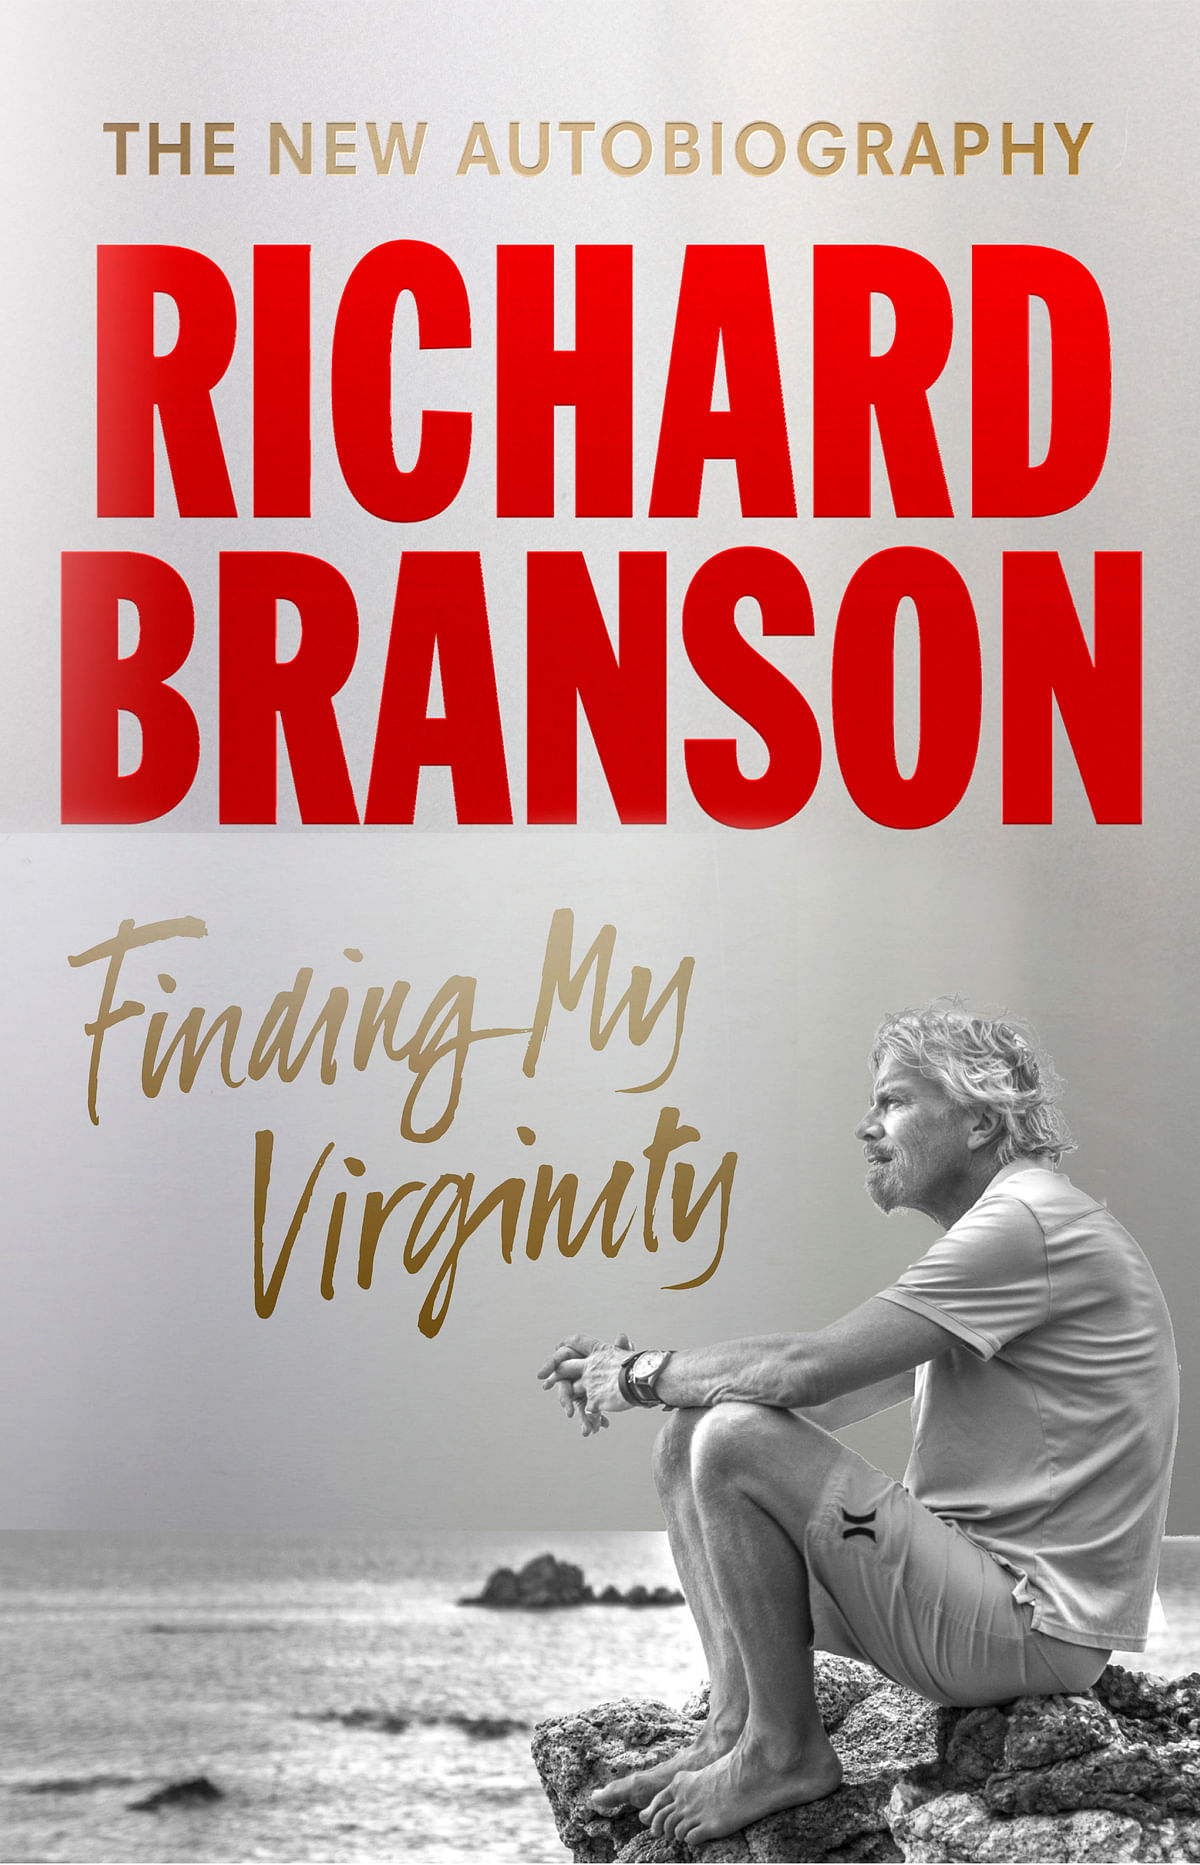 ‘Finding My Virginity’ chronicles how Richard Branson first met Mick Jagger  as a 16-year-old.